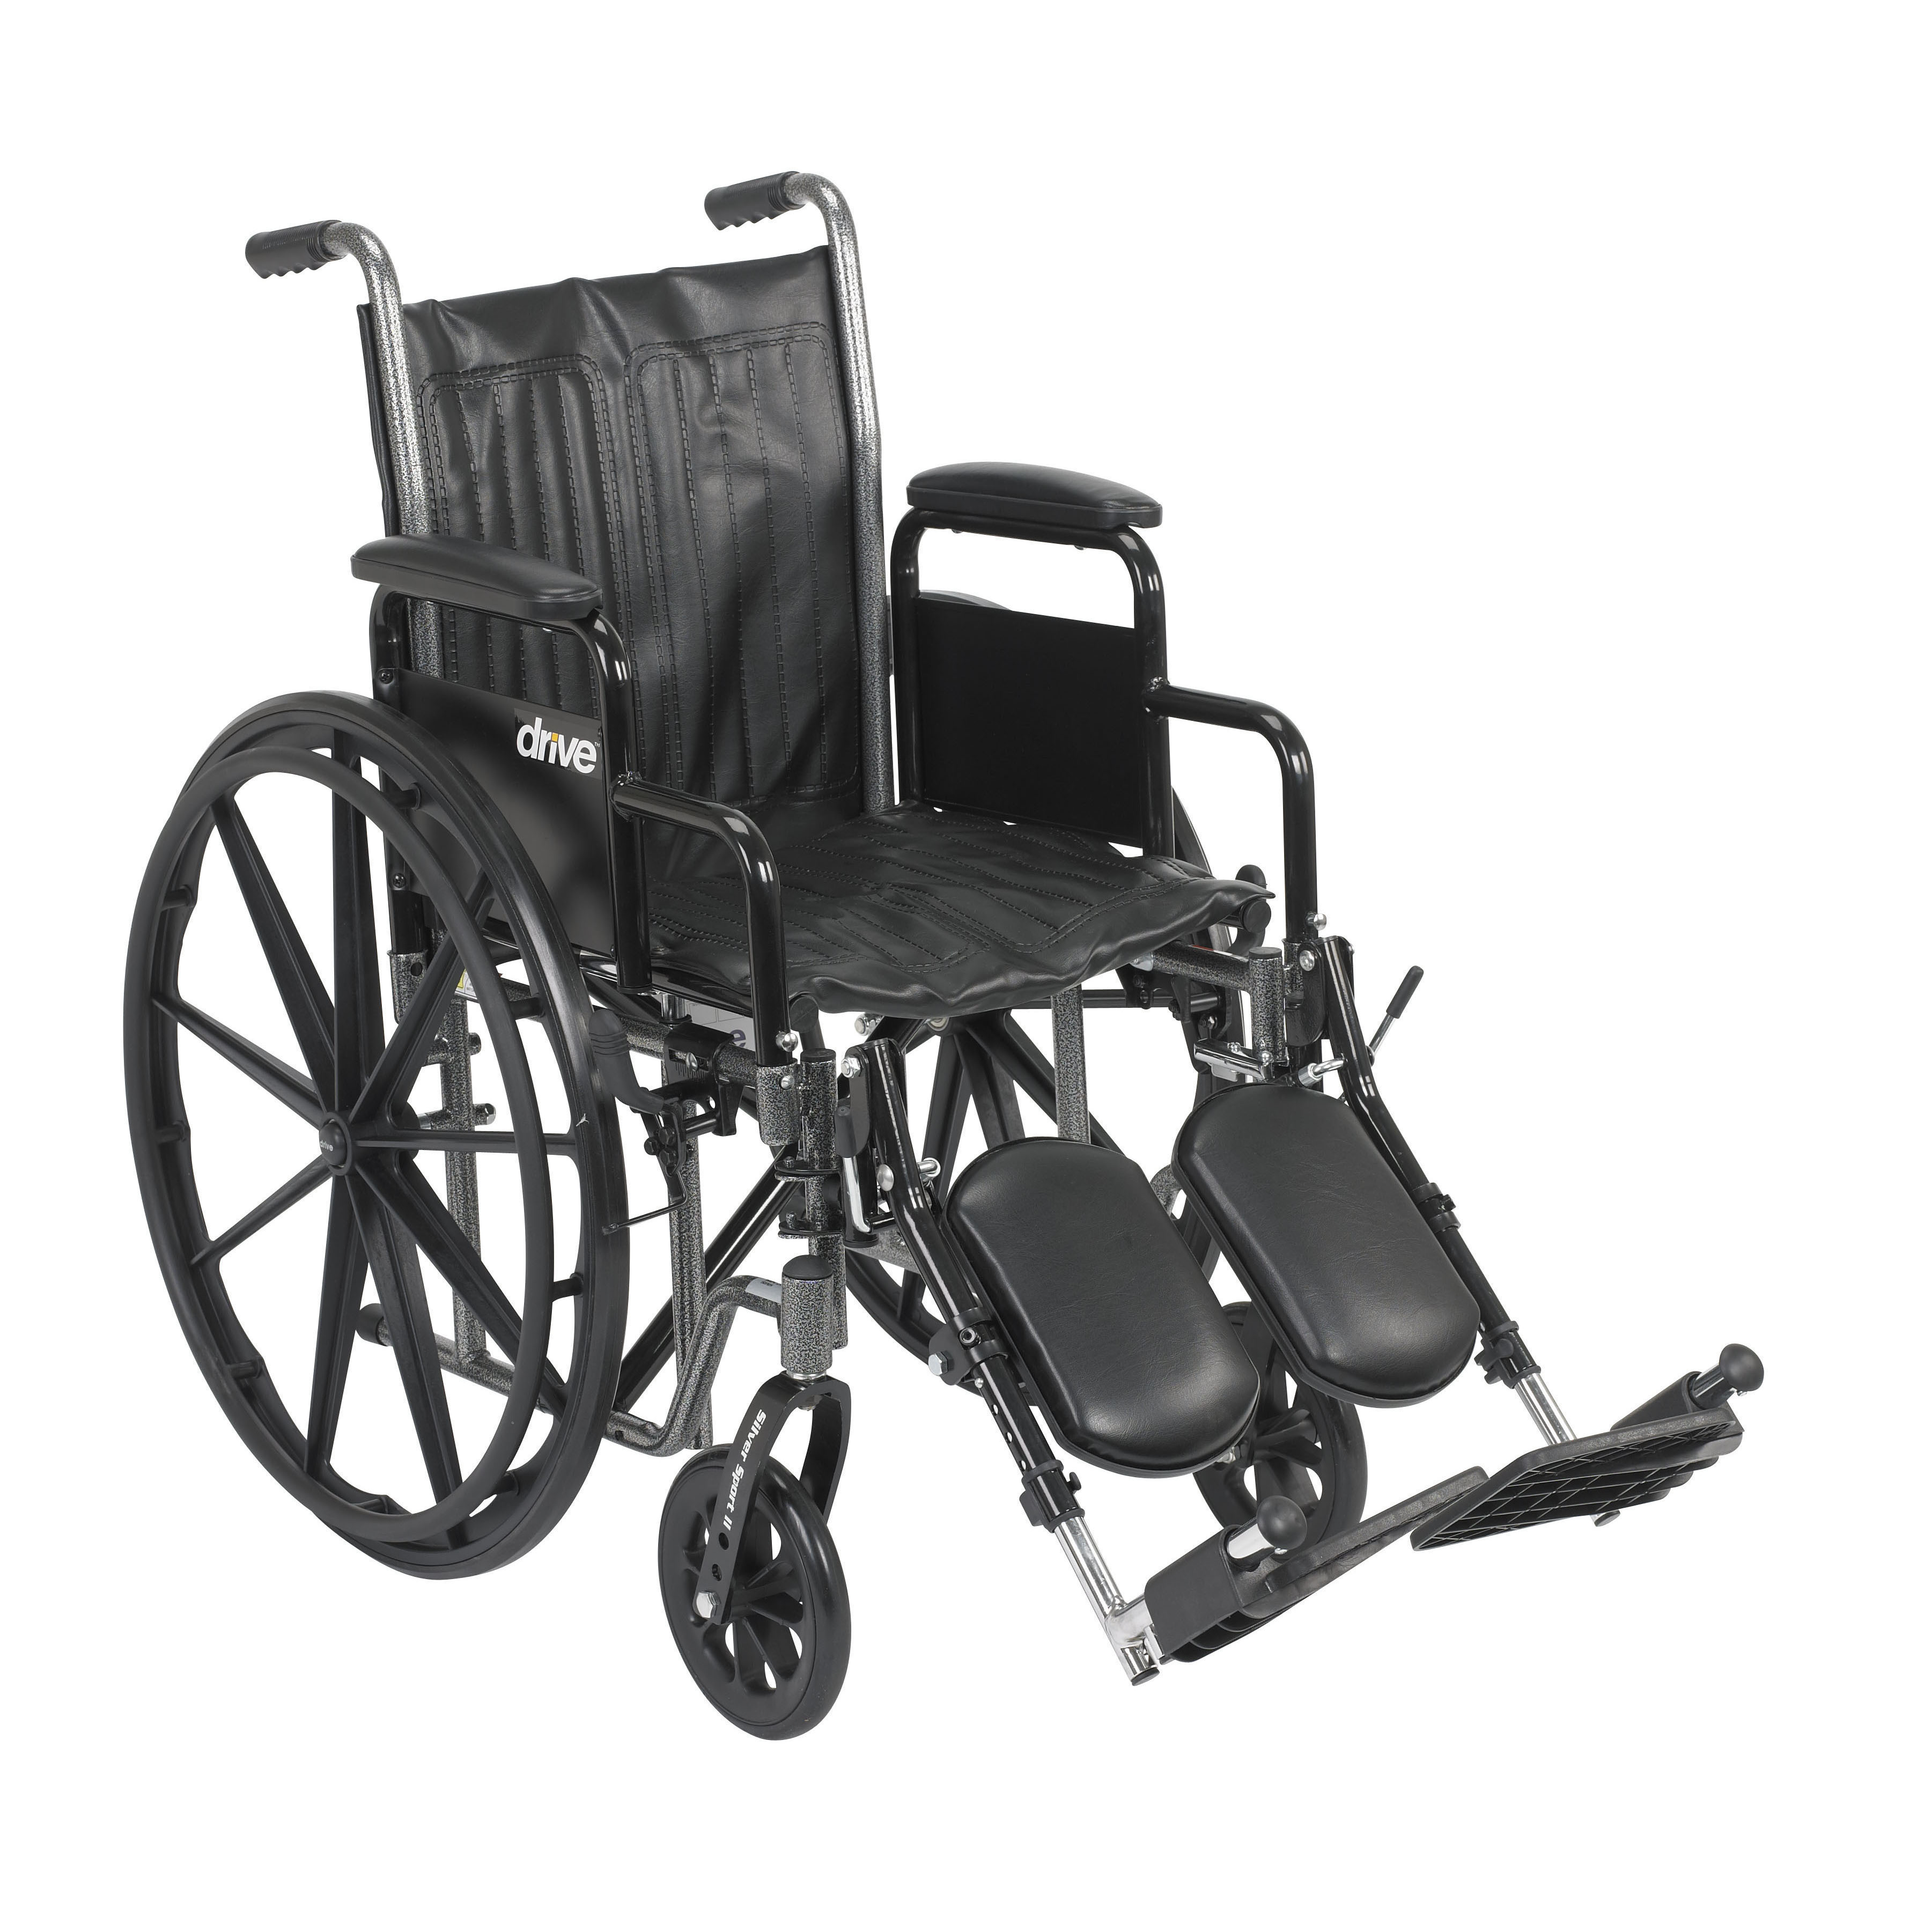 Drive Medical Silver Sport 2 Wheelchair, Detachable Desk Arms, Elevating Leg Rests, 18" Seat - image 1 of 2